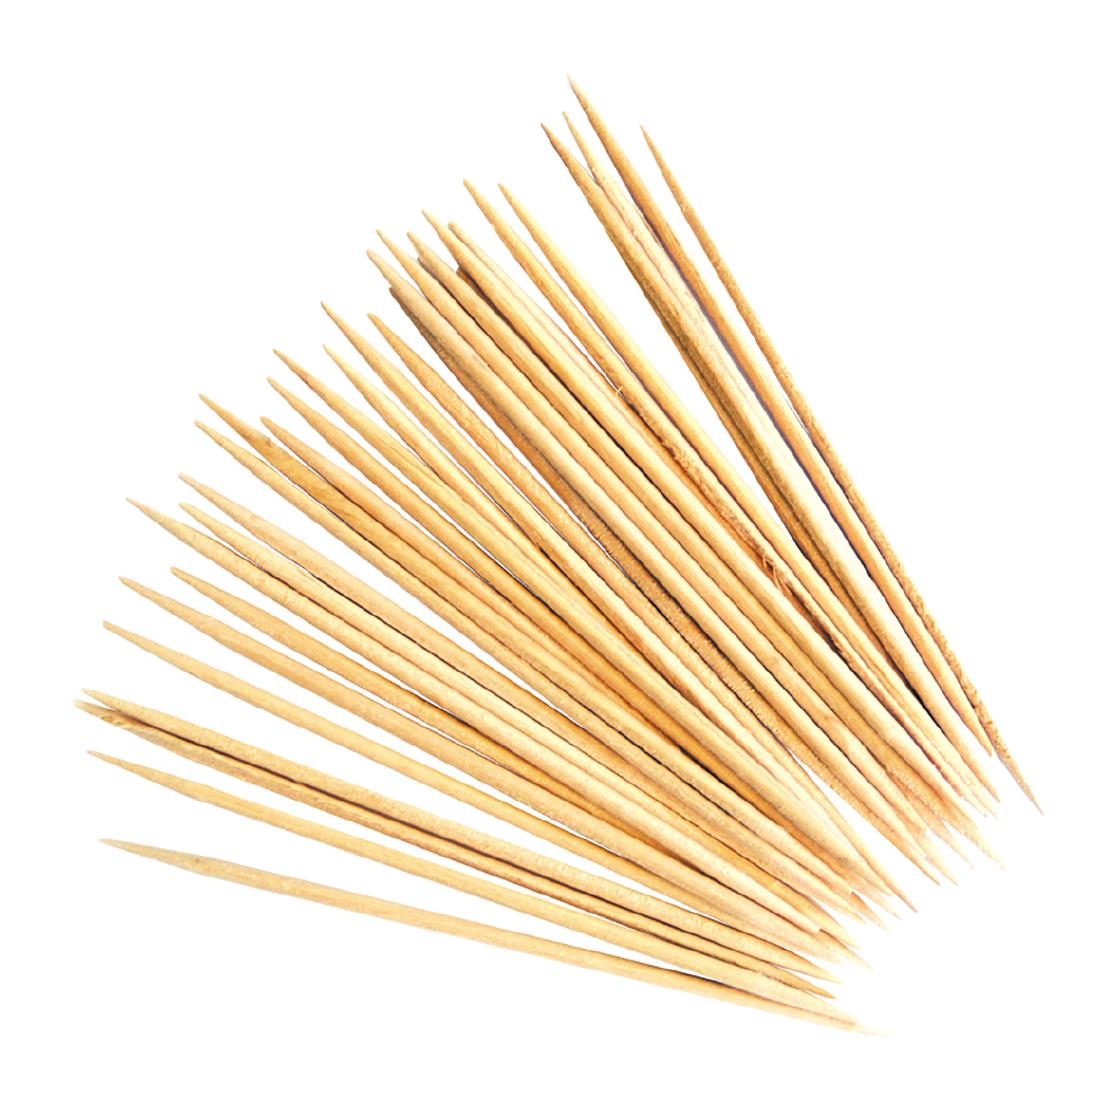 Beaumont Wooden Cocktail Sticks Pack of 1000 (CZ372)